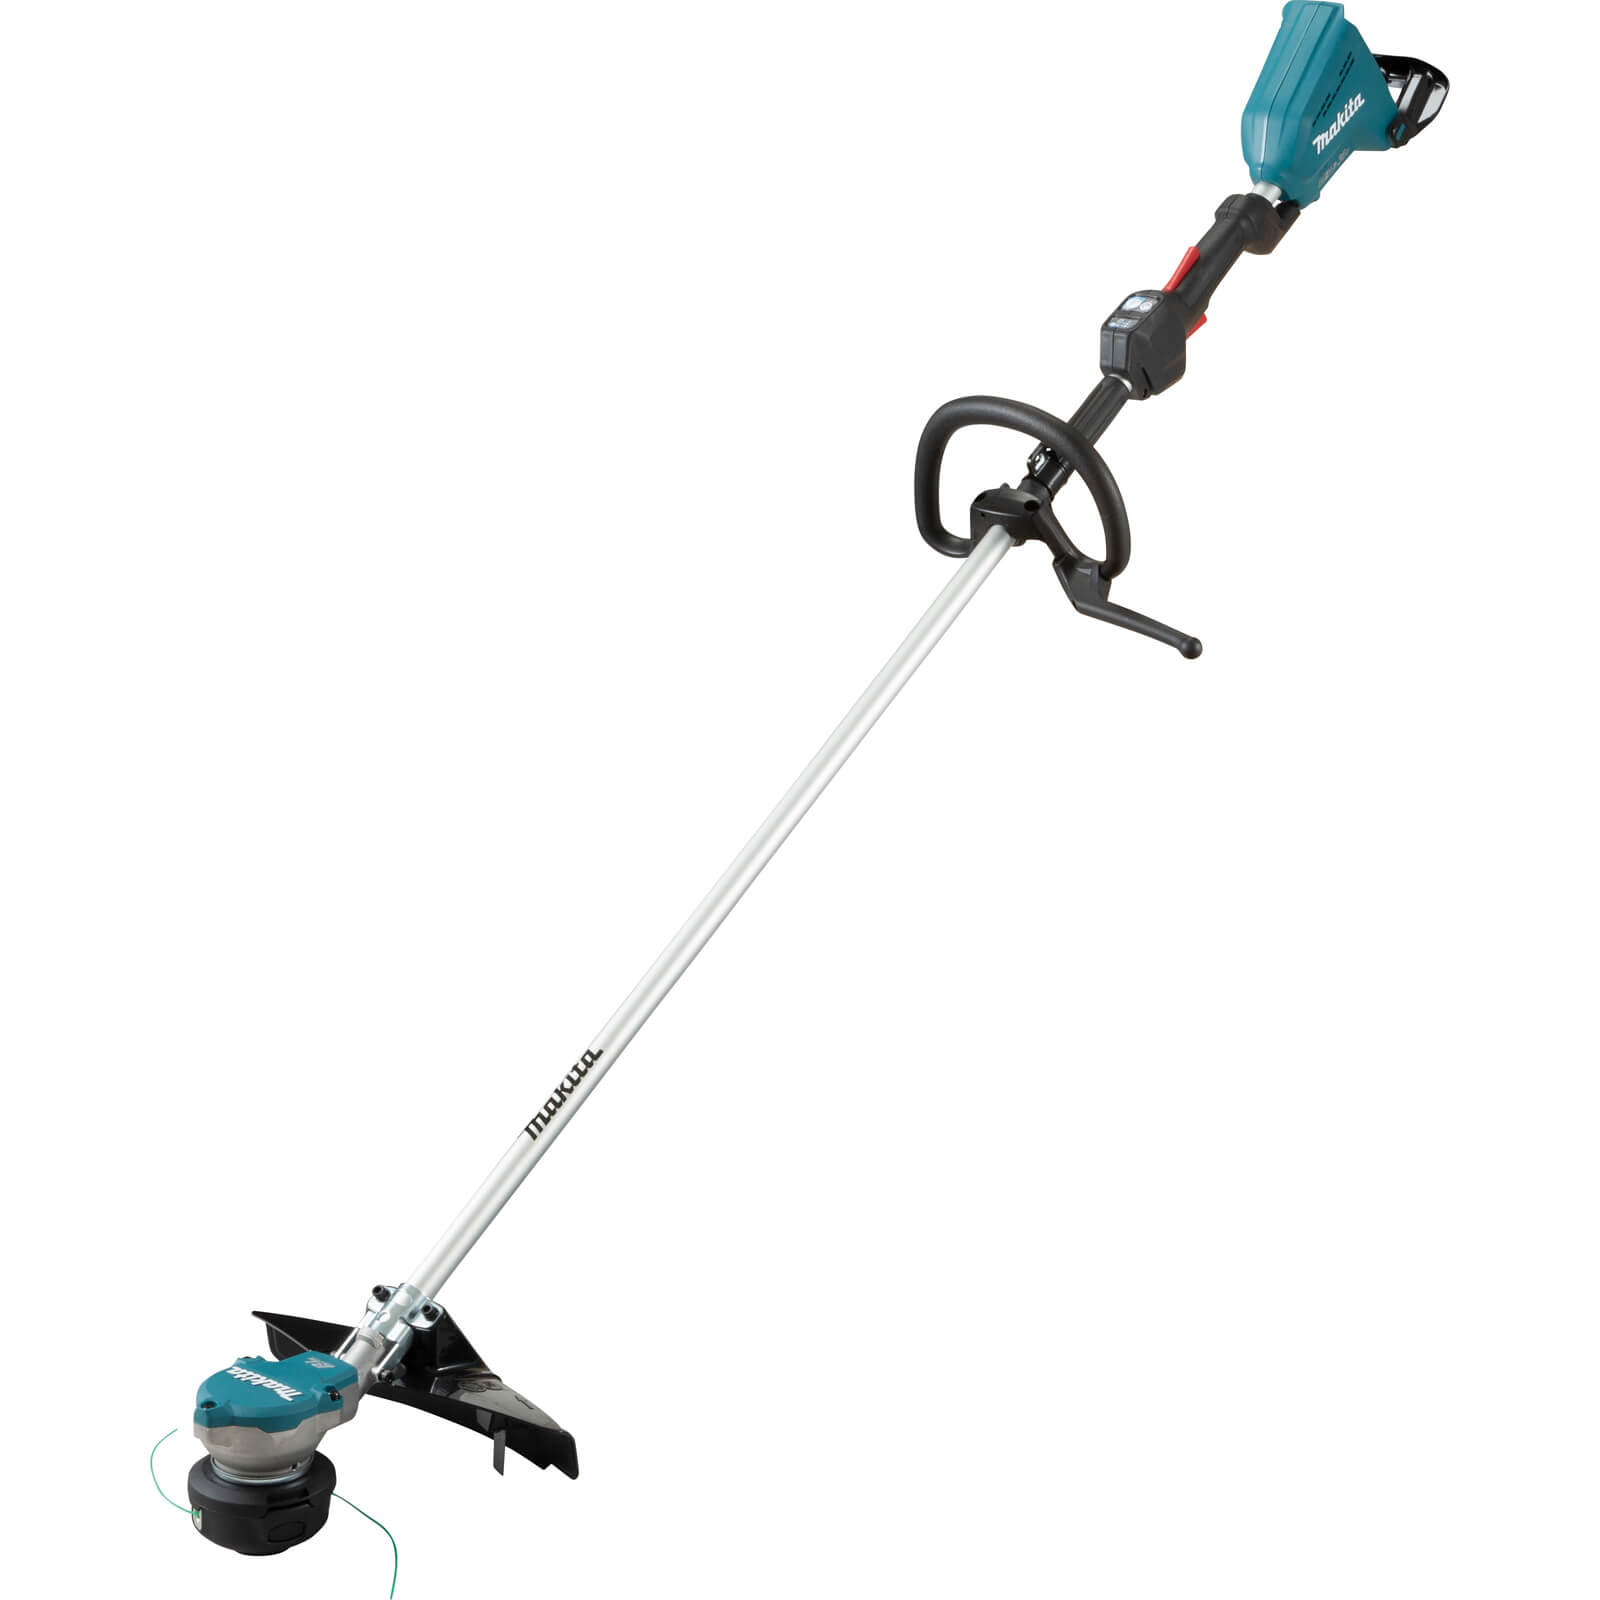 Makita DUR368L Twin 18v LXT Cordless Brushless Grass Trimmer 350mm No Batteries No Charger